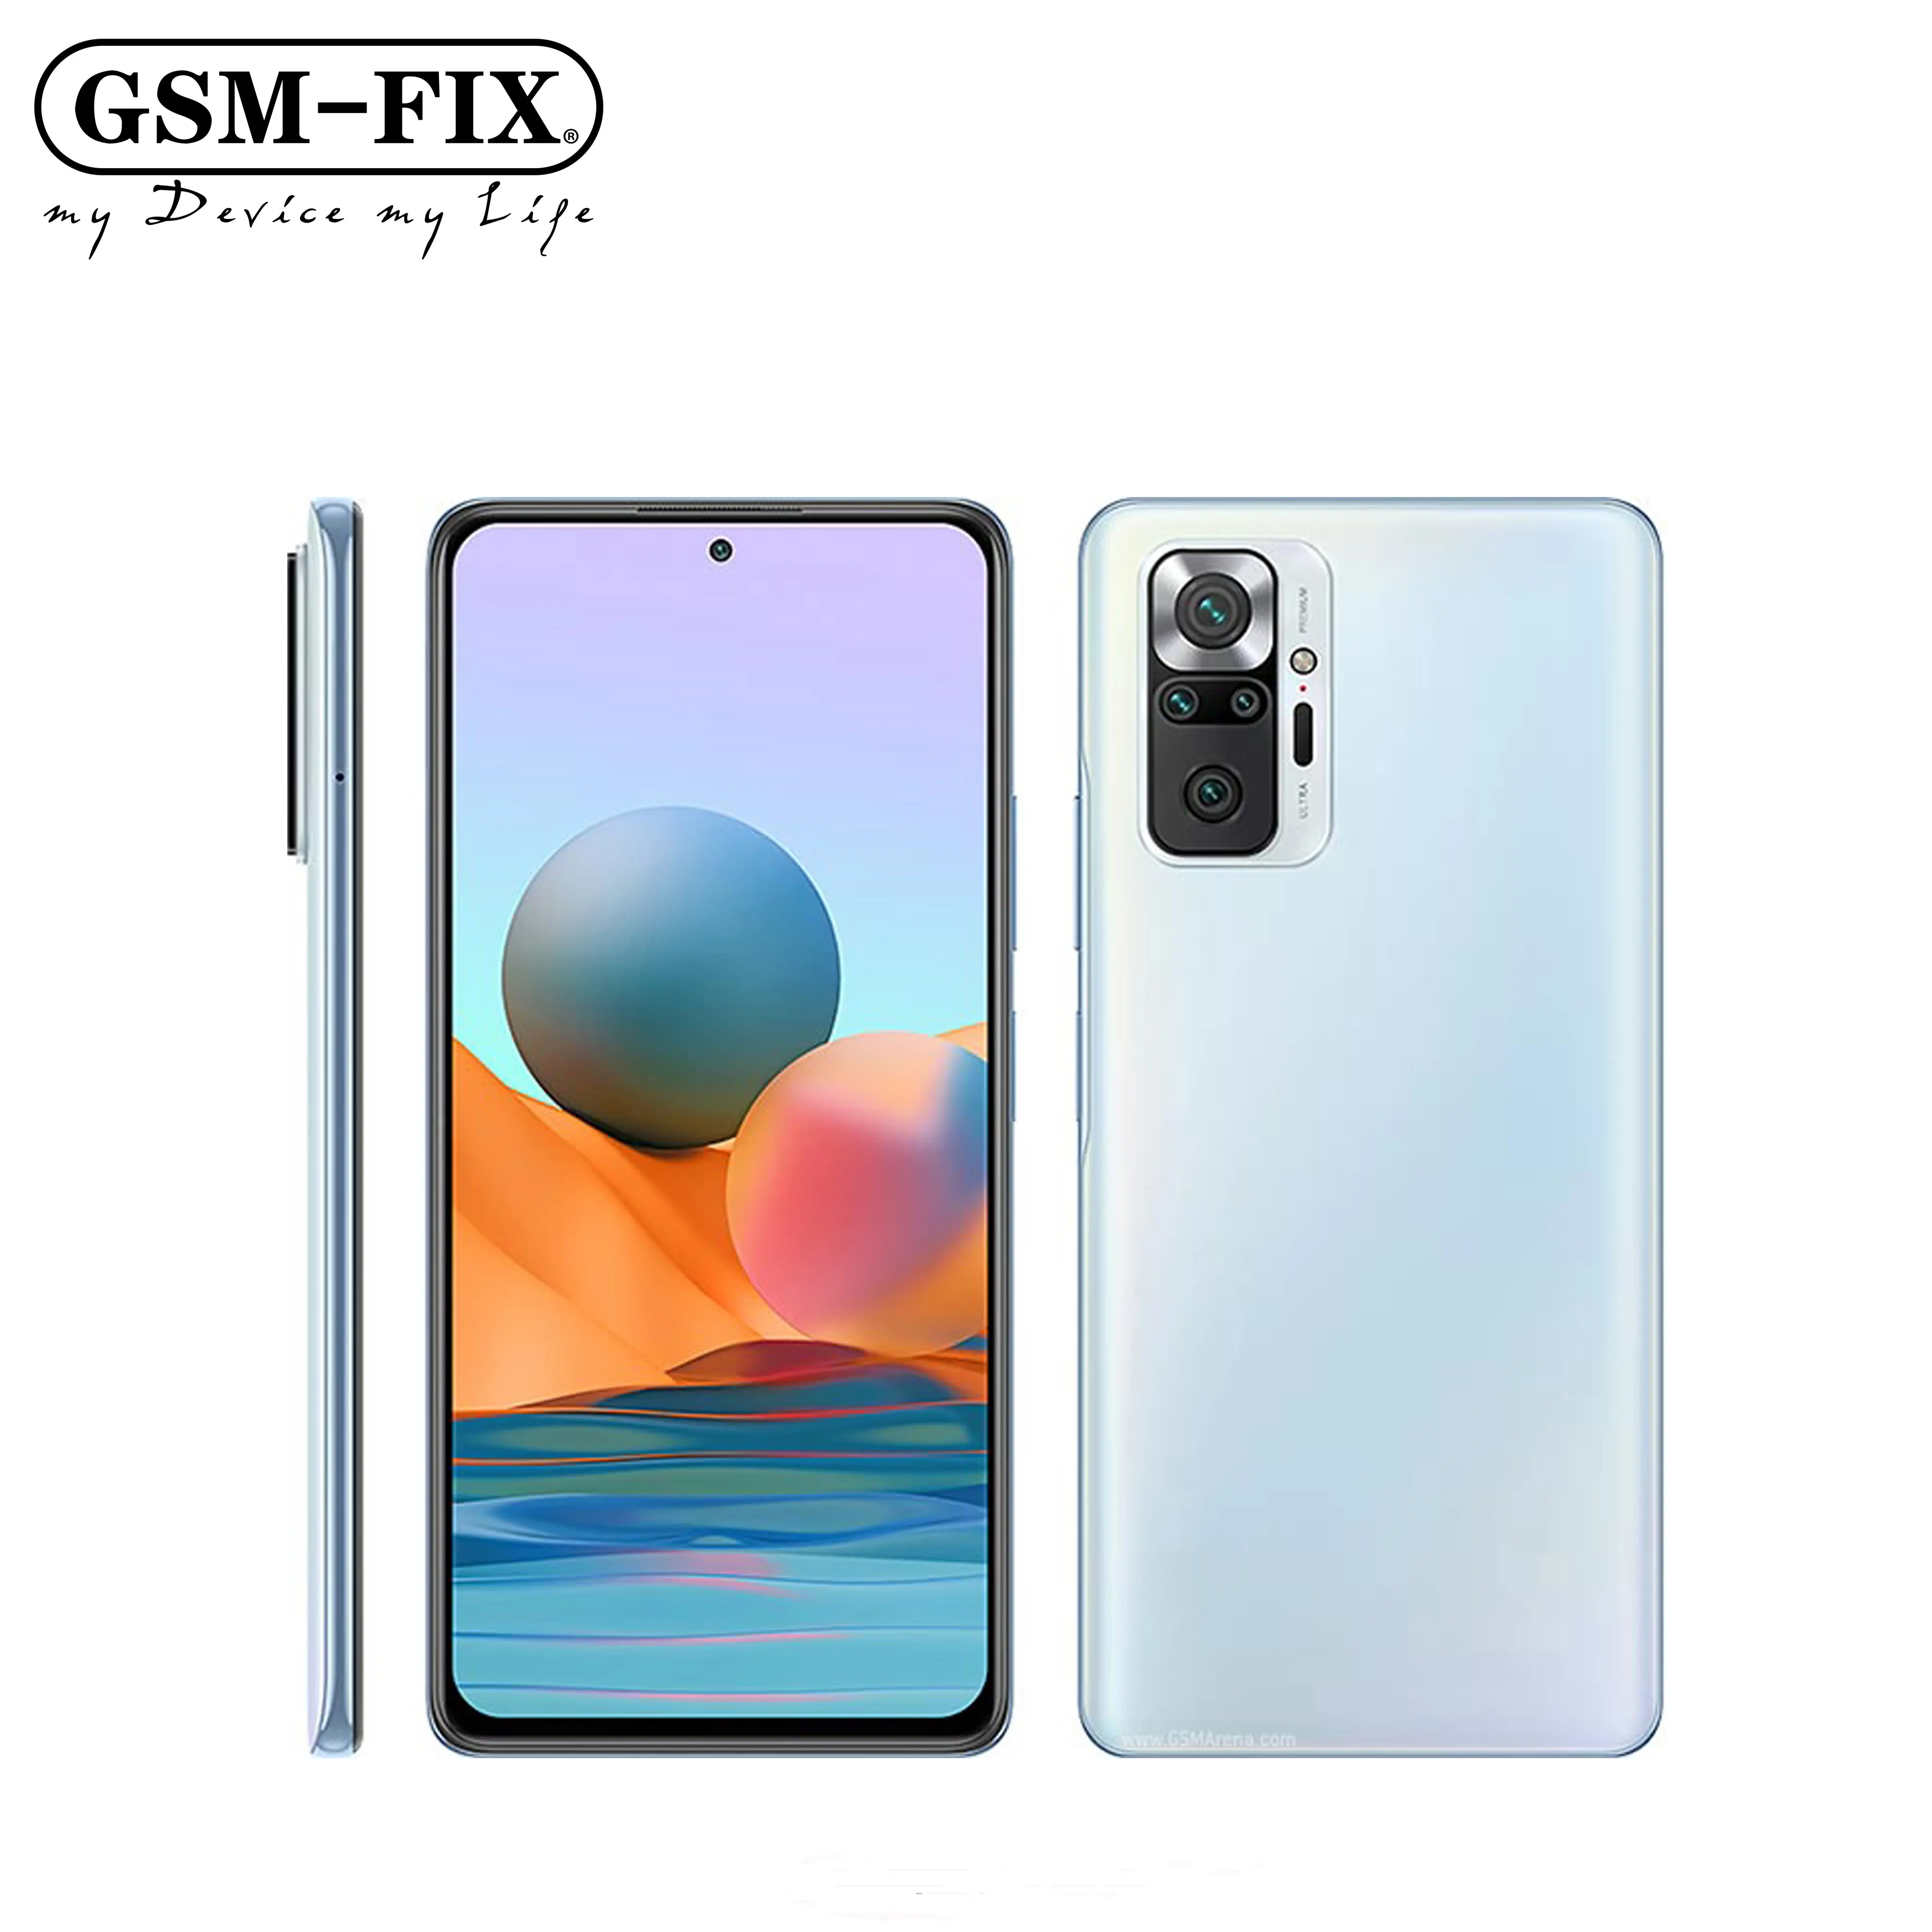 GSM-FIX Global Version For Xiaomi Redmi Note 10 Pro 128/256GB Snapdragon 732G 108MP Camera 120Hz AMOLED 5020mAh 33W Fast Charge